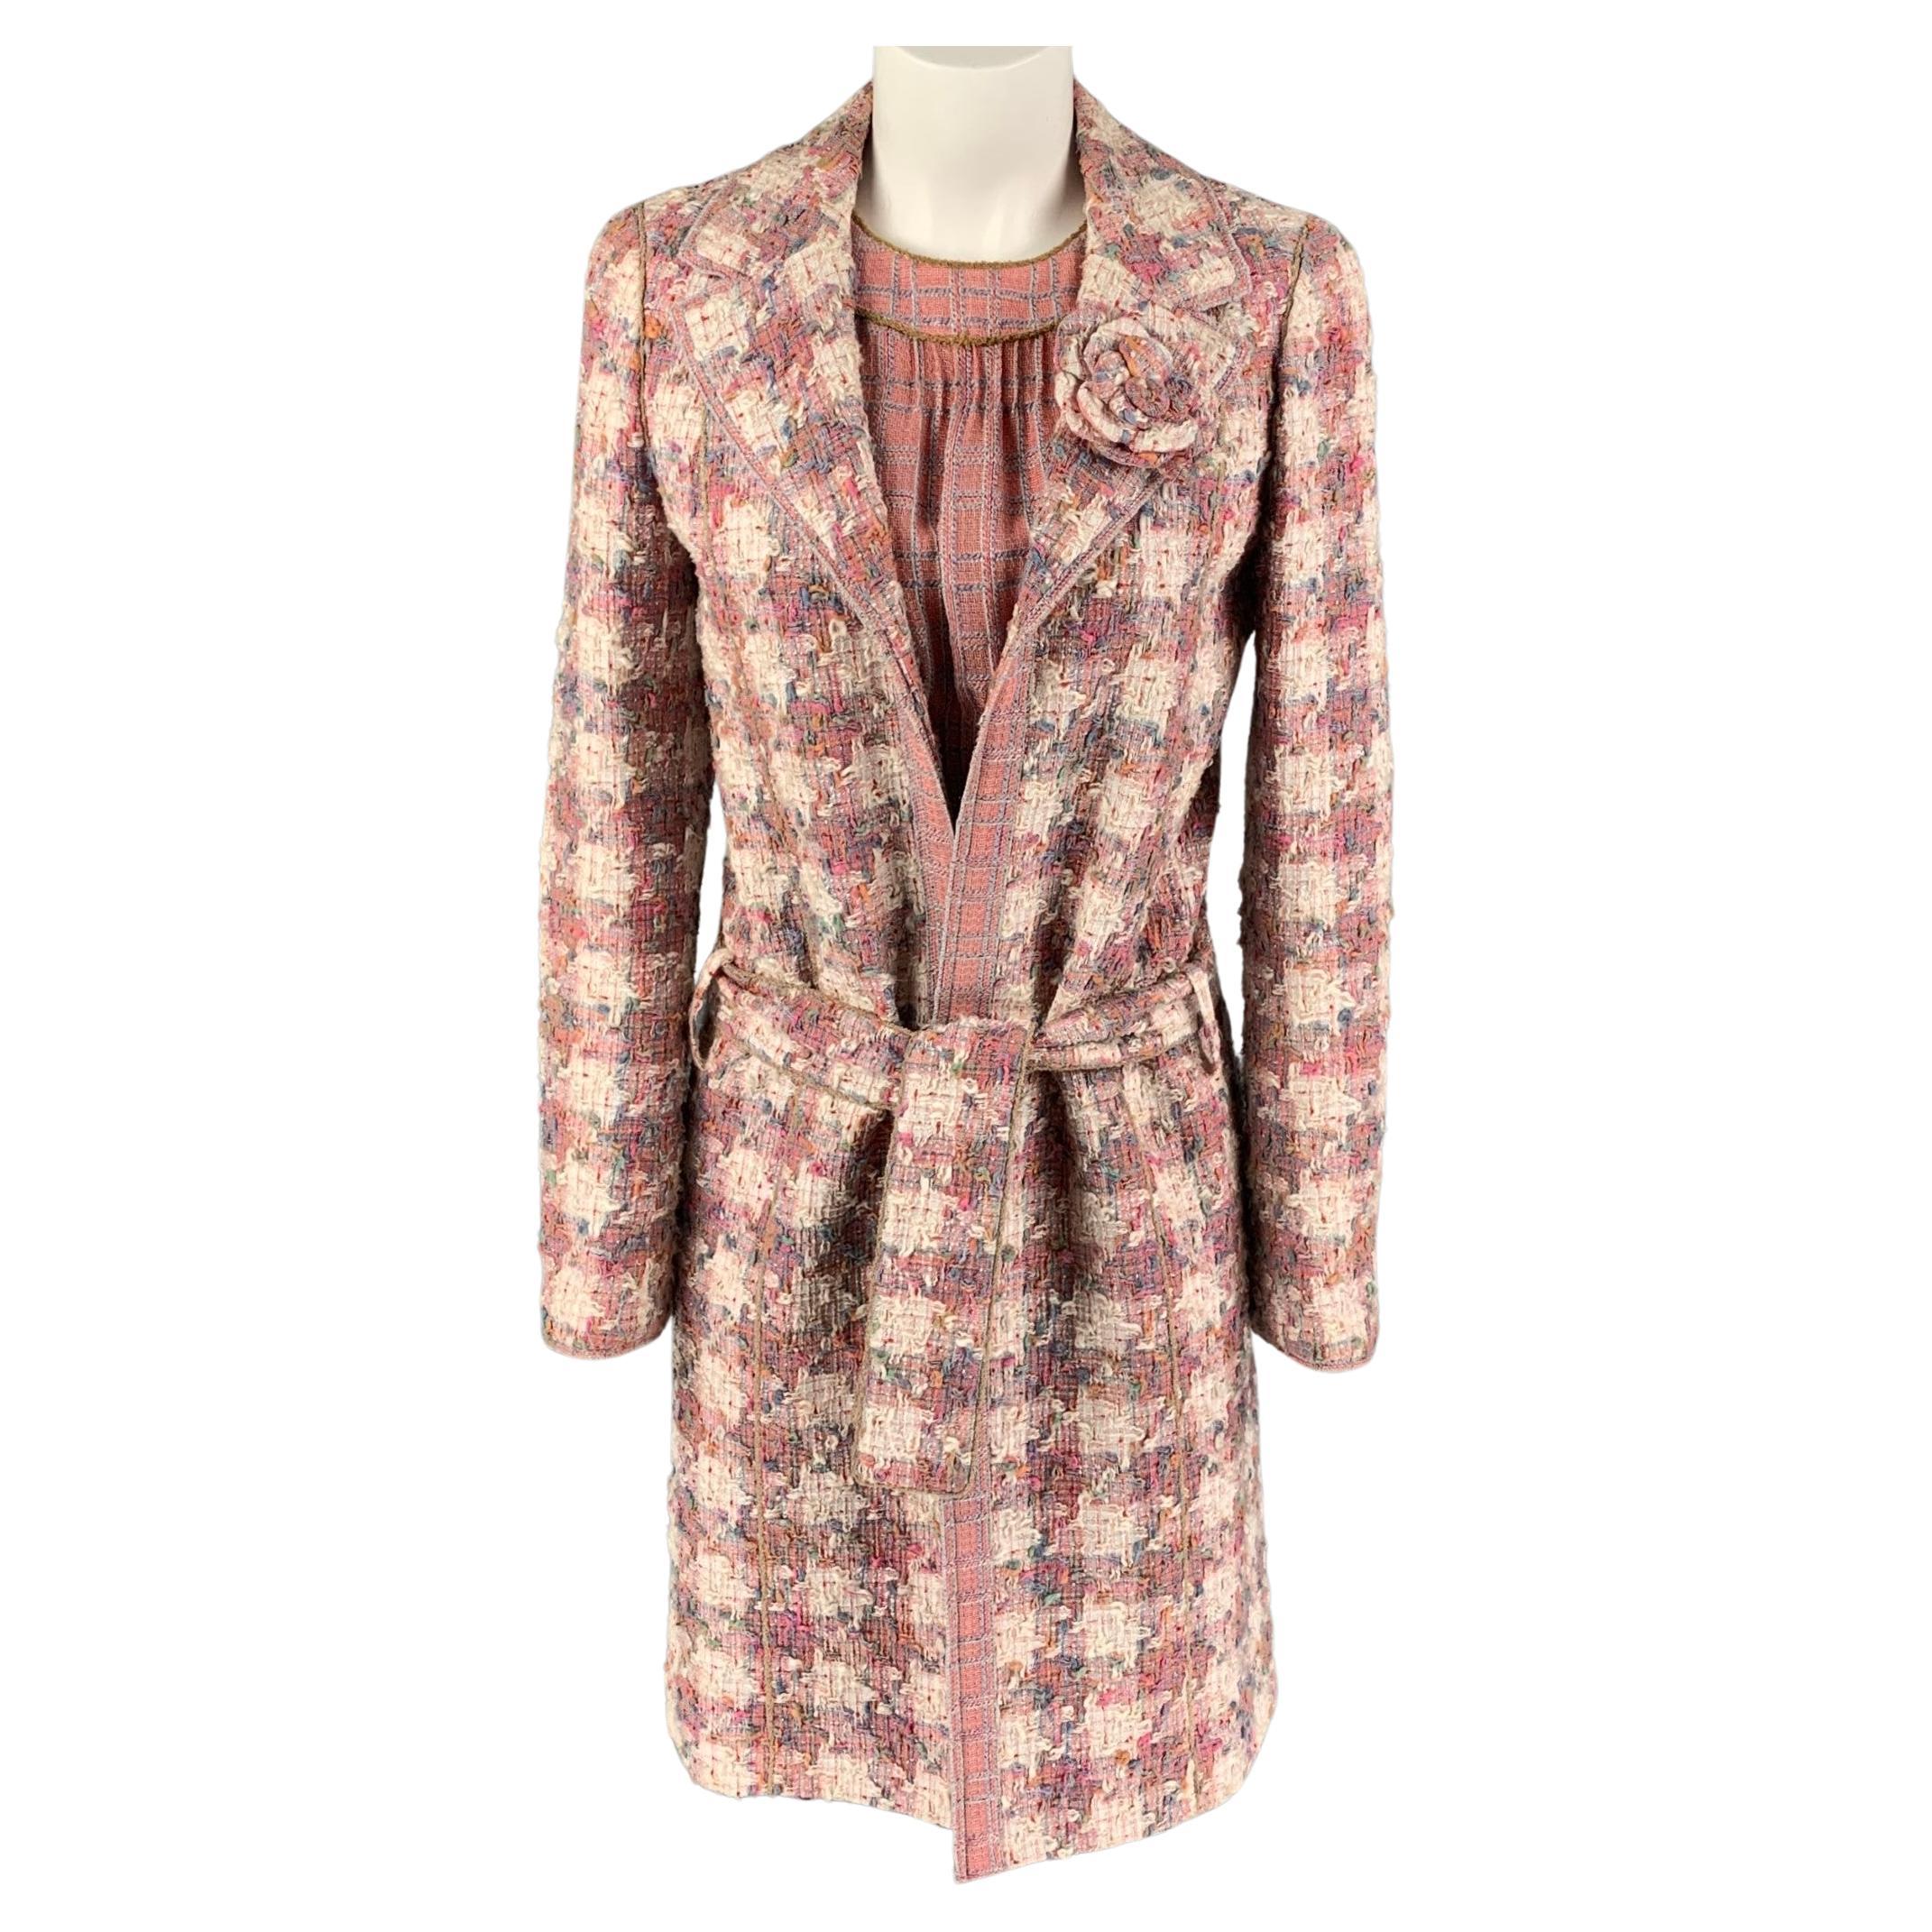 Plus Size Mother of Bride Jacket Chanel Boucle Turquoise Pink